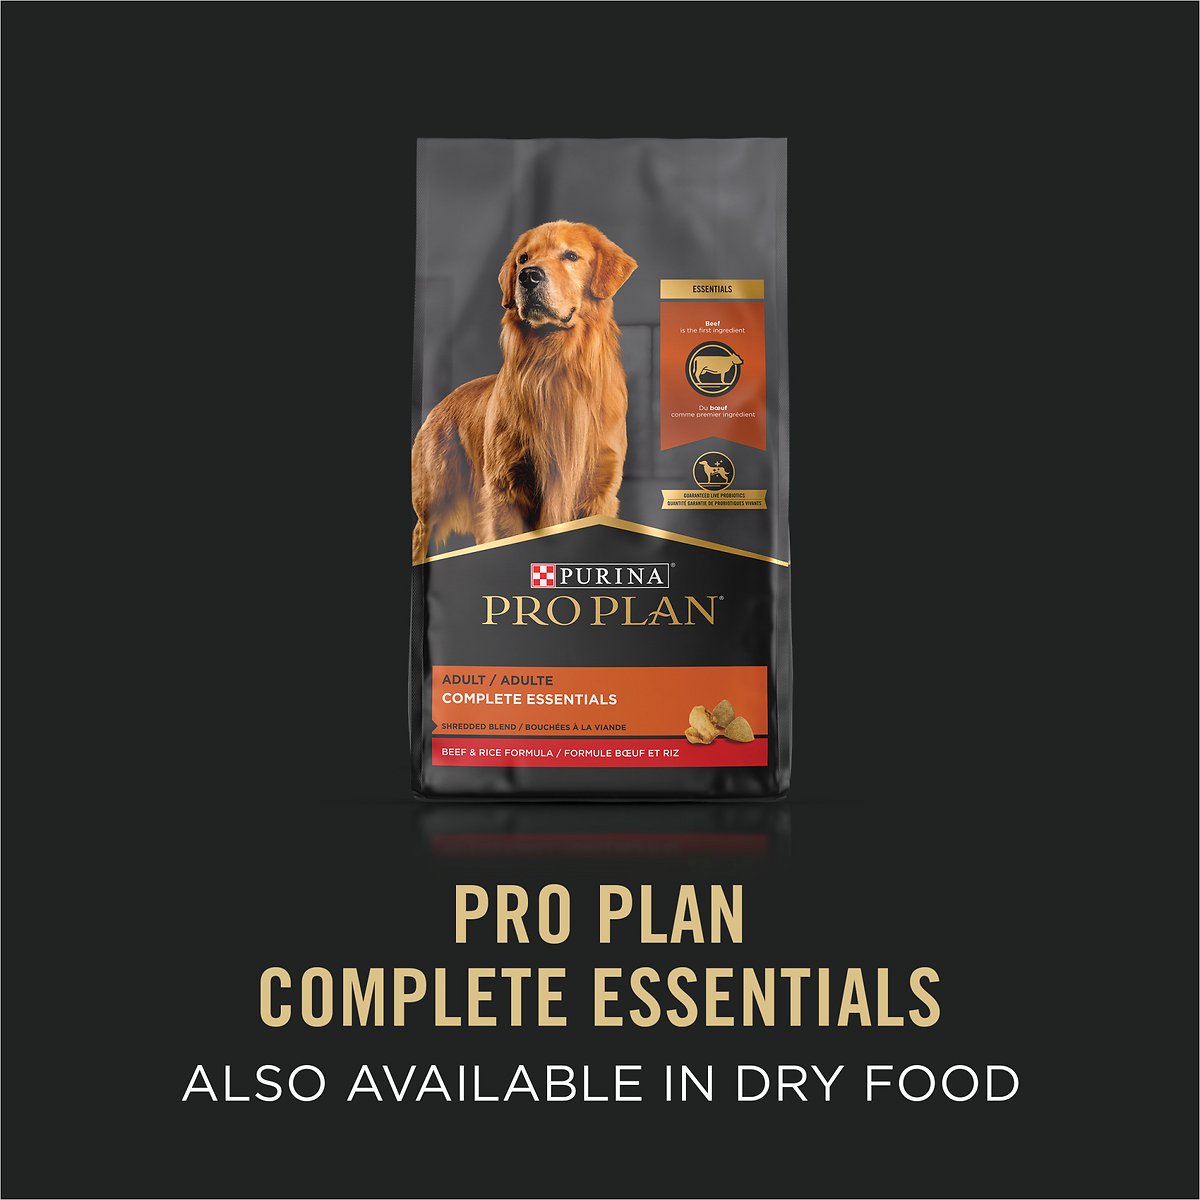 Purina Pro Plan High Protein Pate Beef & Rice Entree Wet Dog Food  Canned Dog Food  | PetMax Canada